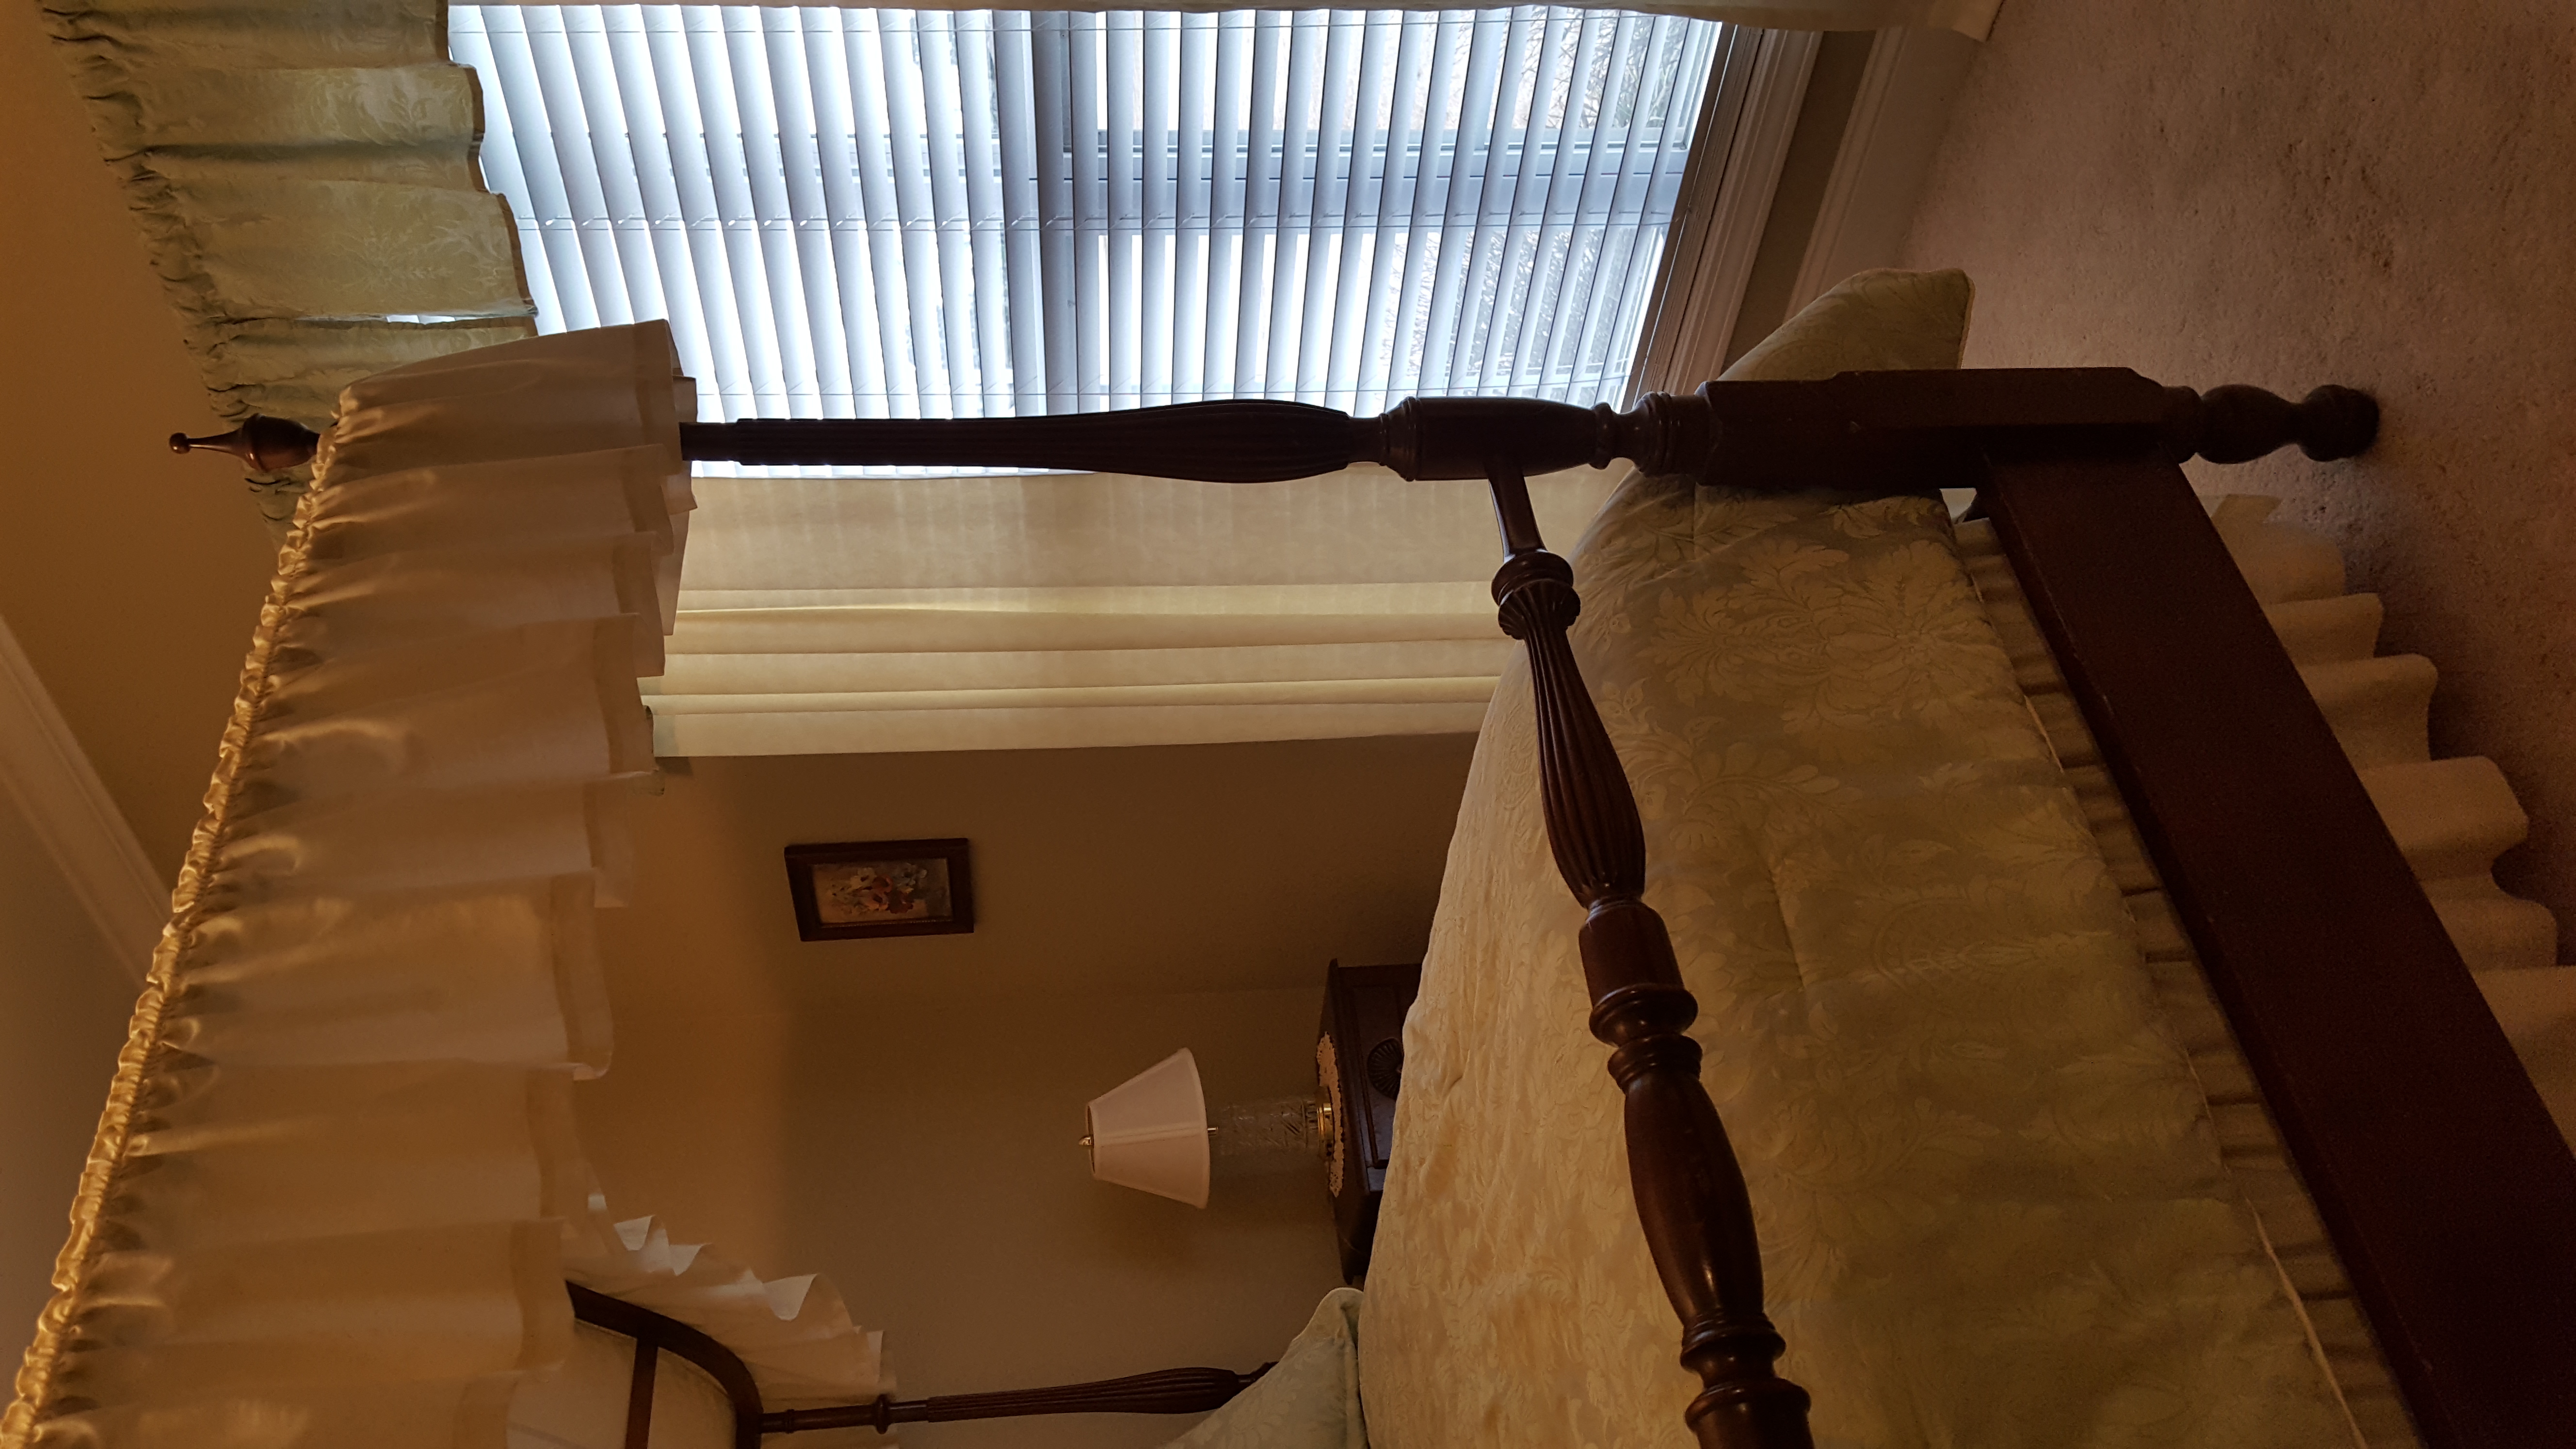 Antique Mahogany Full Bed with Canopy For Sale | 0 | Classifieds